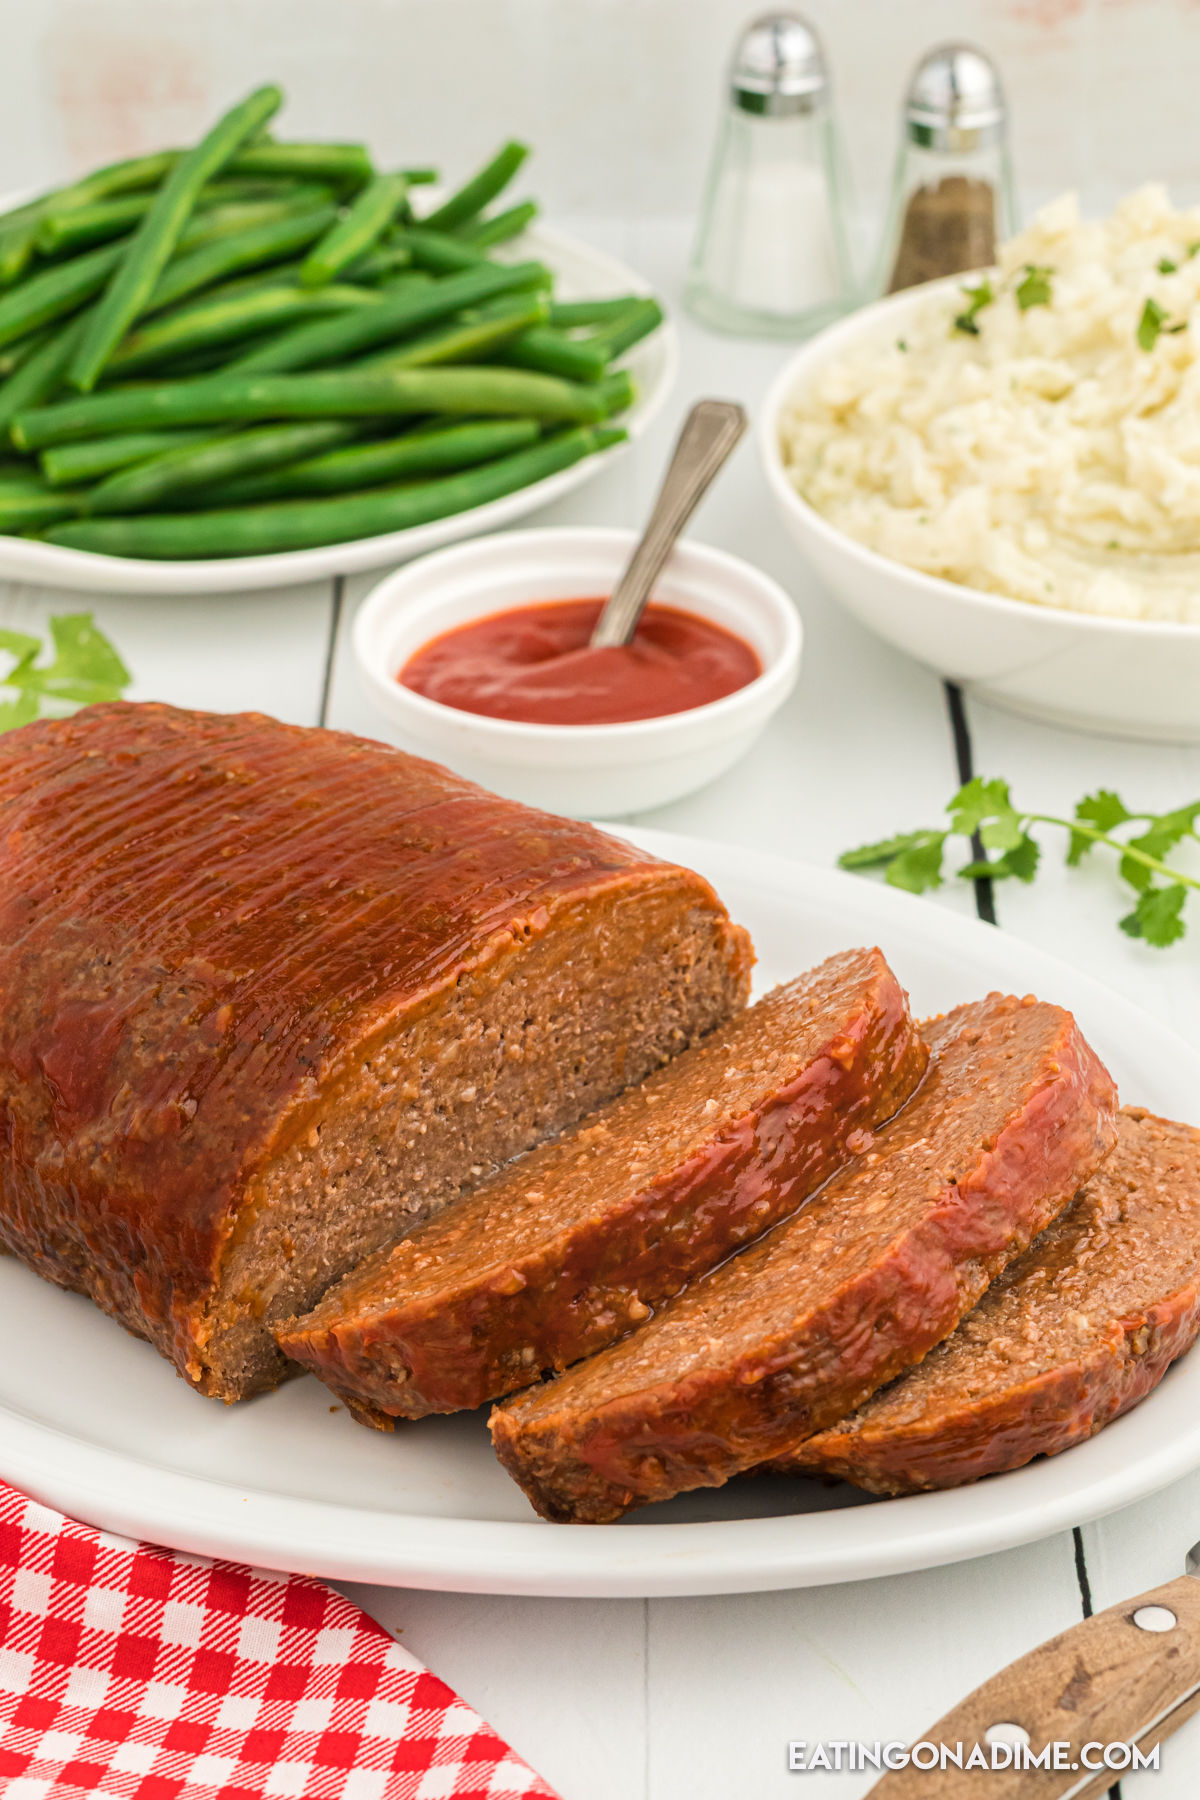 Meatloaf sliced on a white plate with a side of green beans and mashed potatoes